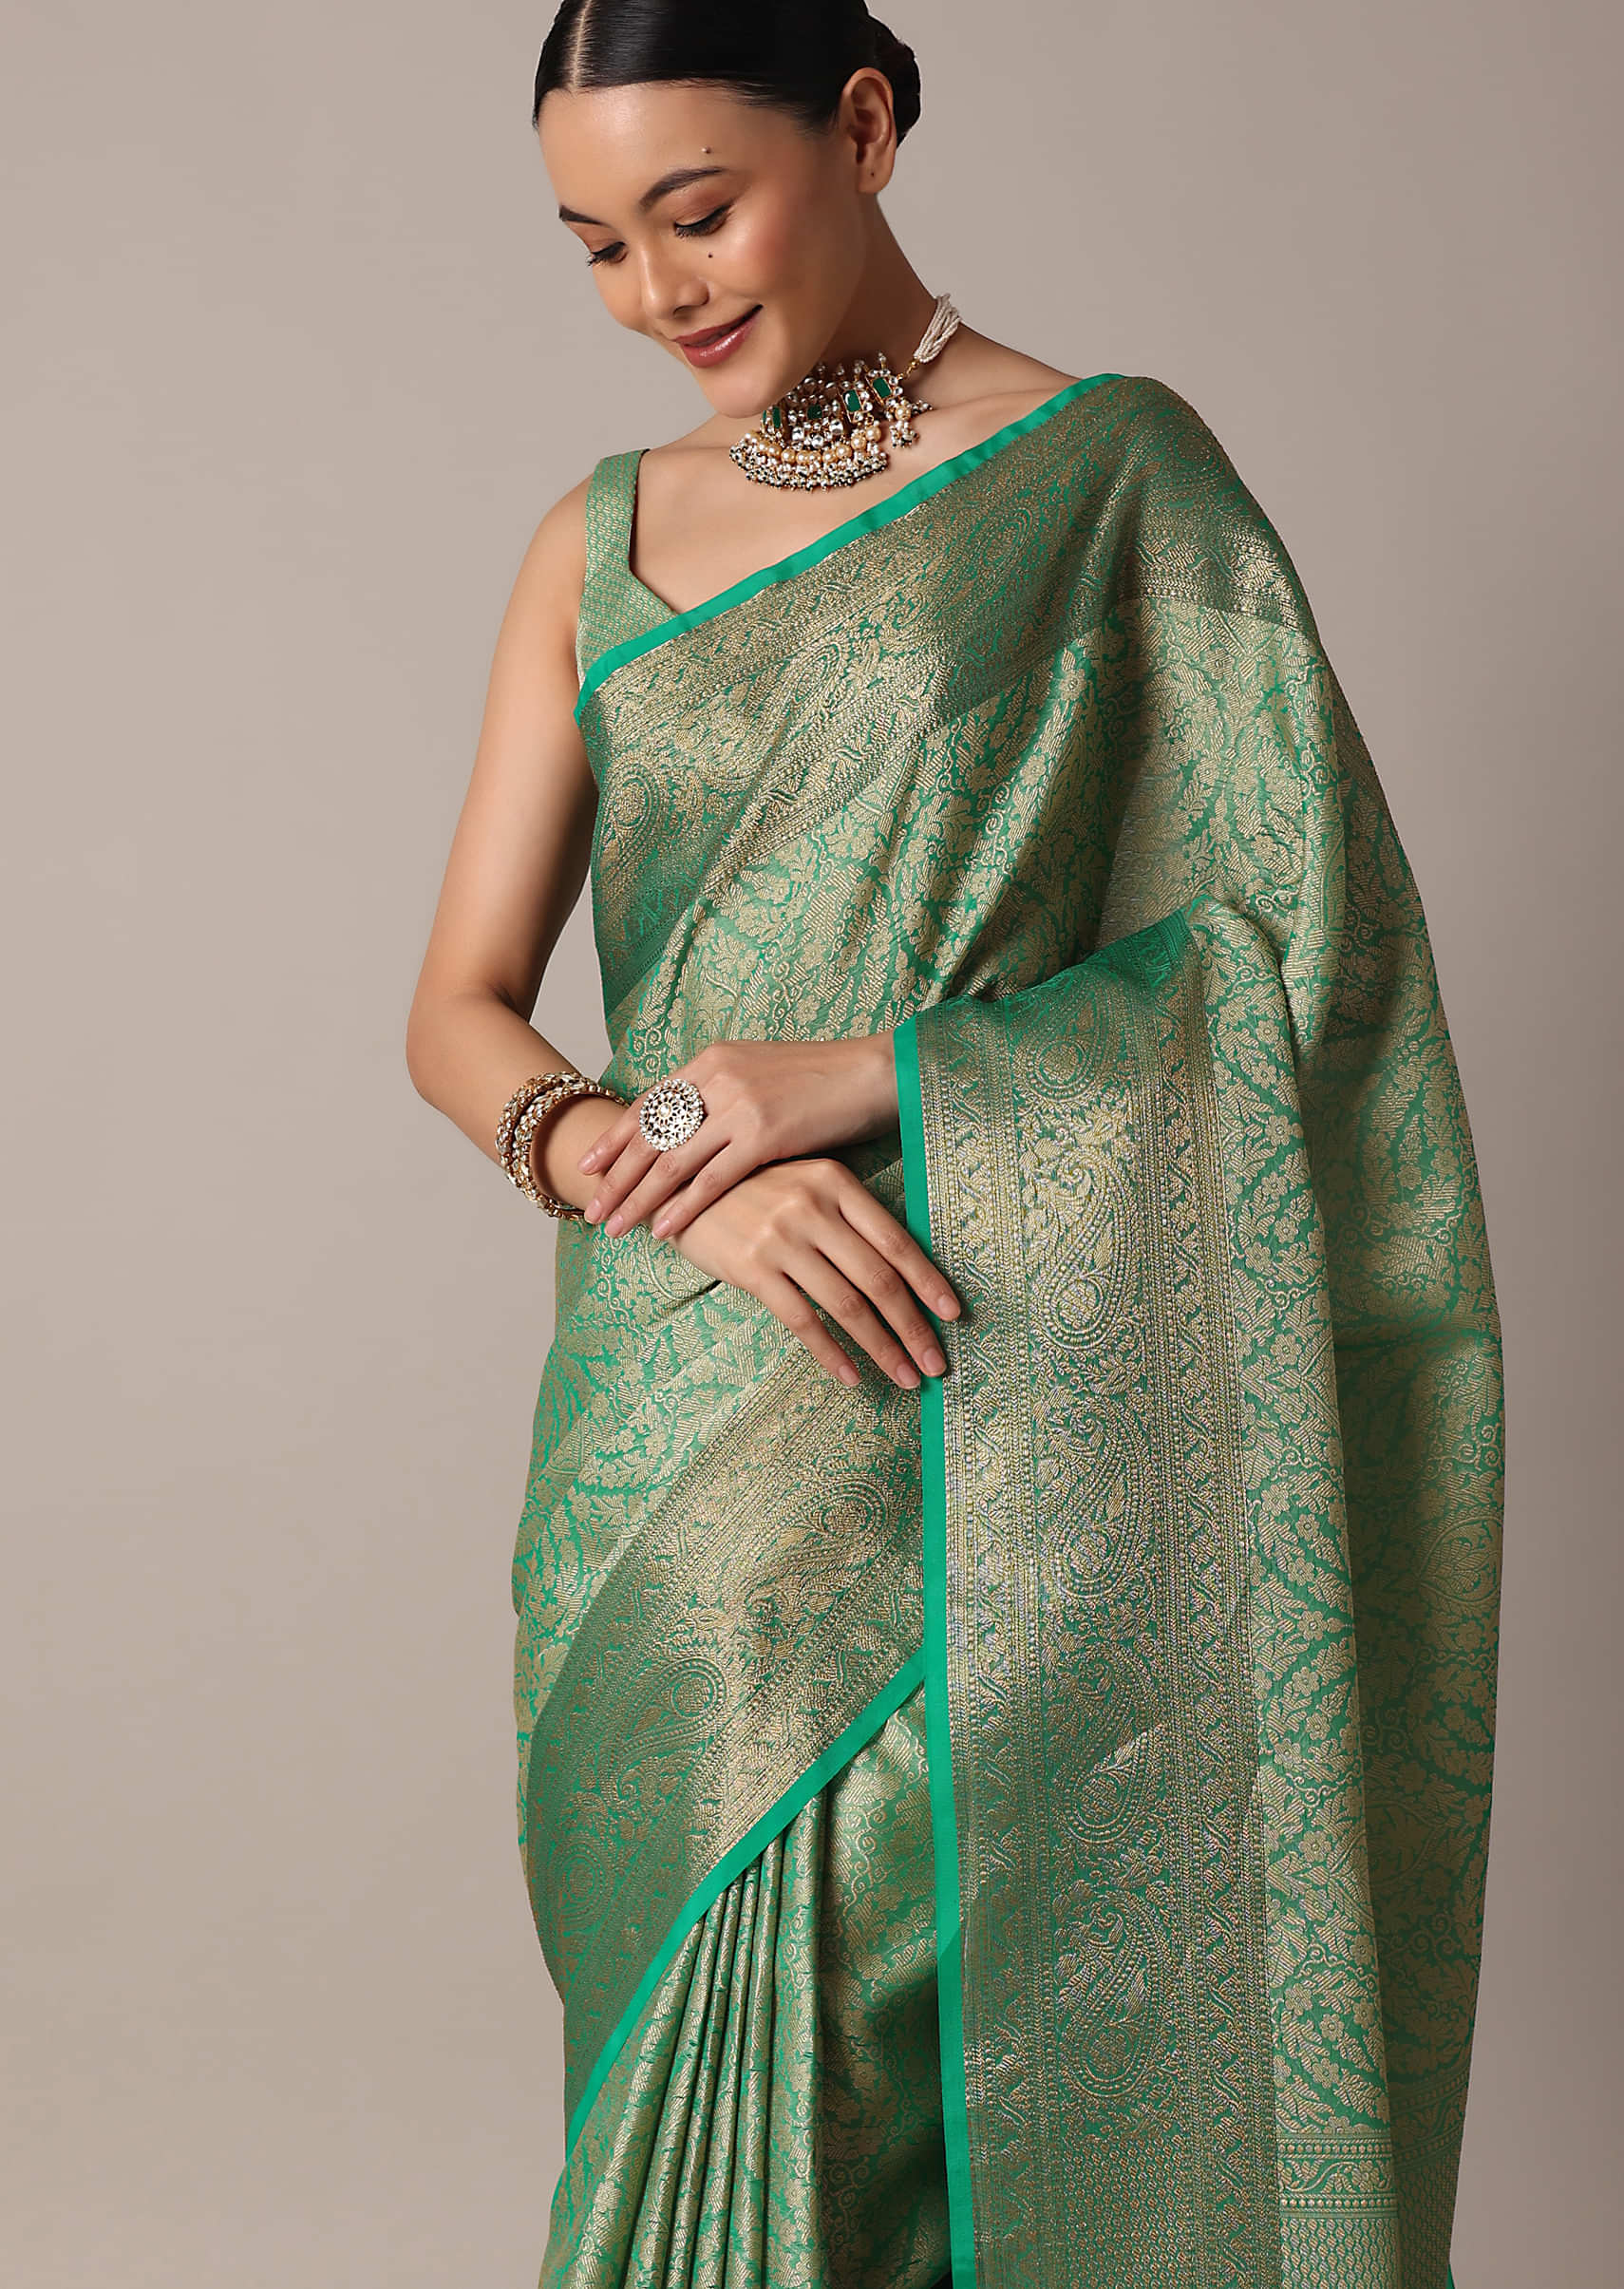 Green Sarees - Buy All Types of Green Colour Sarees Online